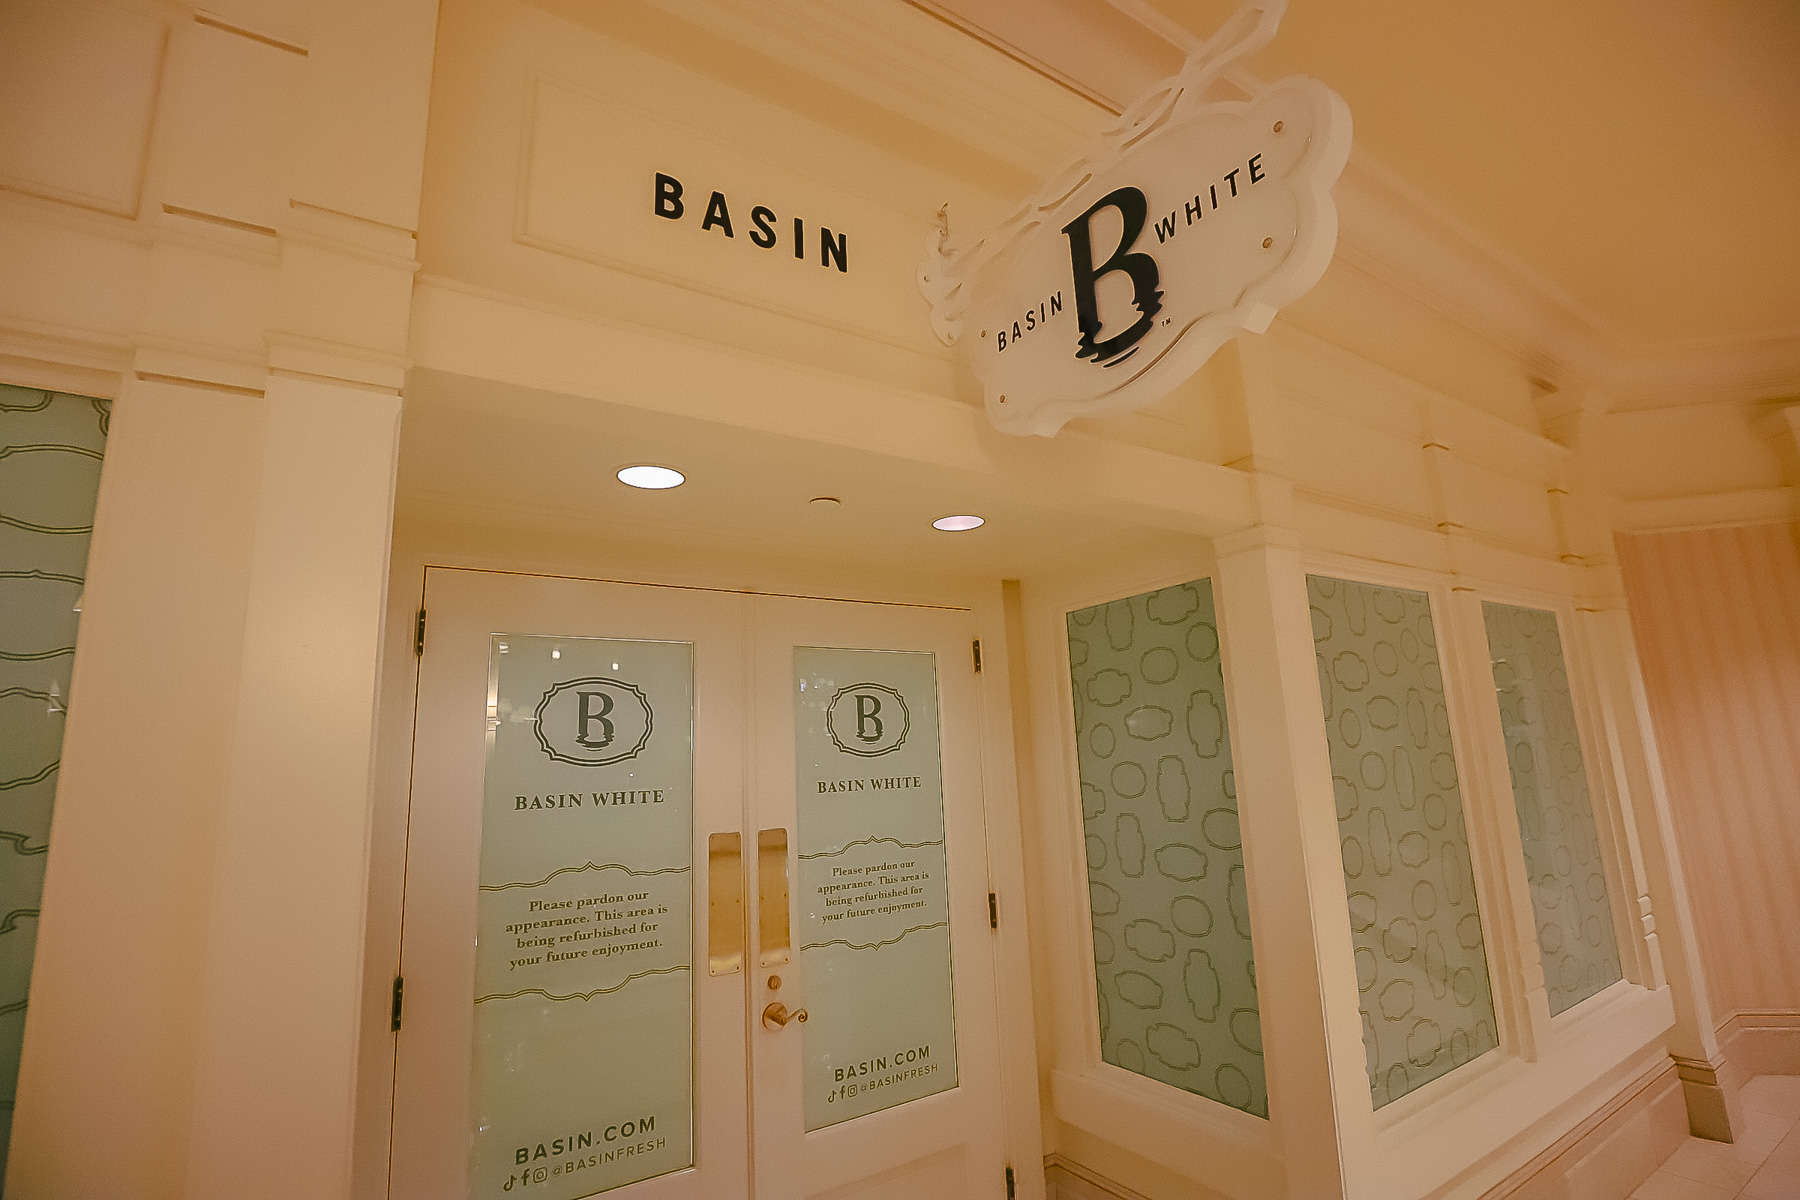 Basin was closed for remodel at Disney's Grand Floridian 